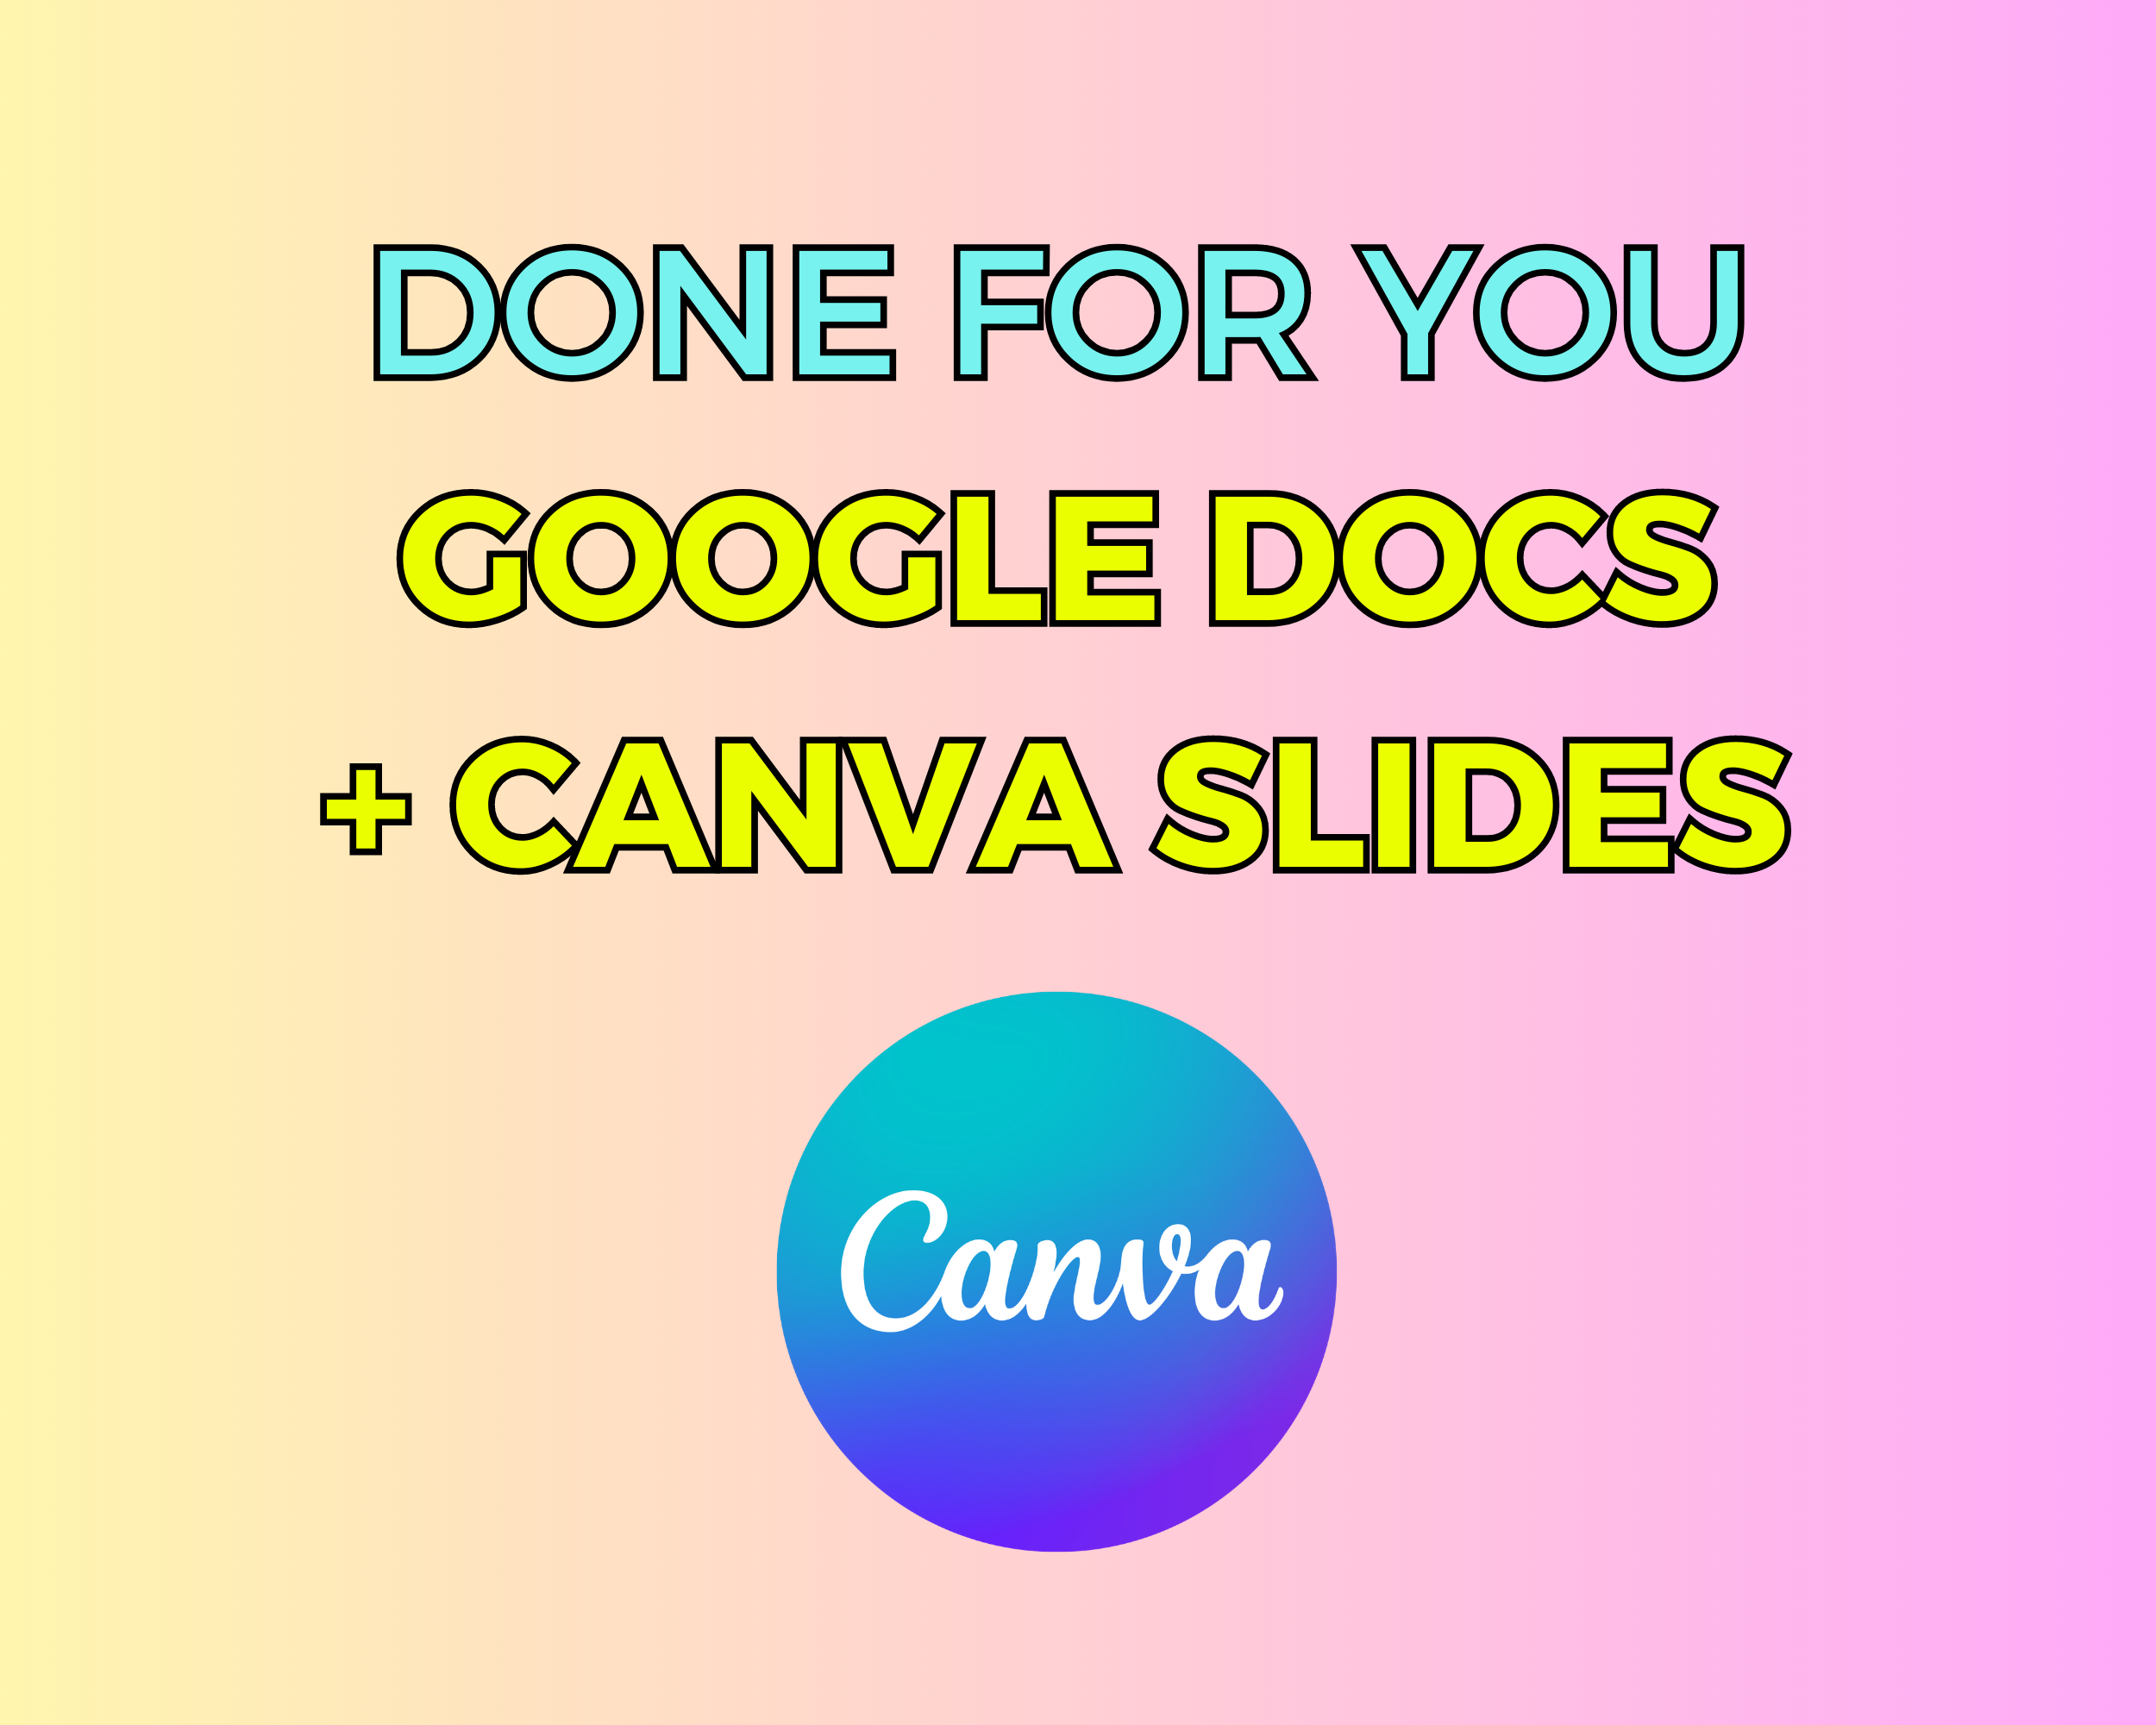 BUNDLE of 19 Business Courses | Lessons in Google Docs | Done for You Canva Slides